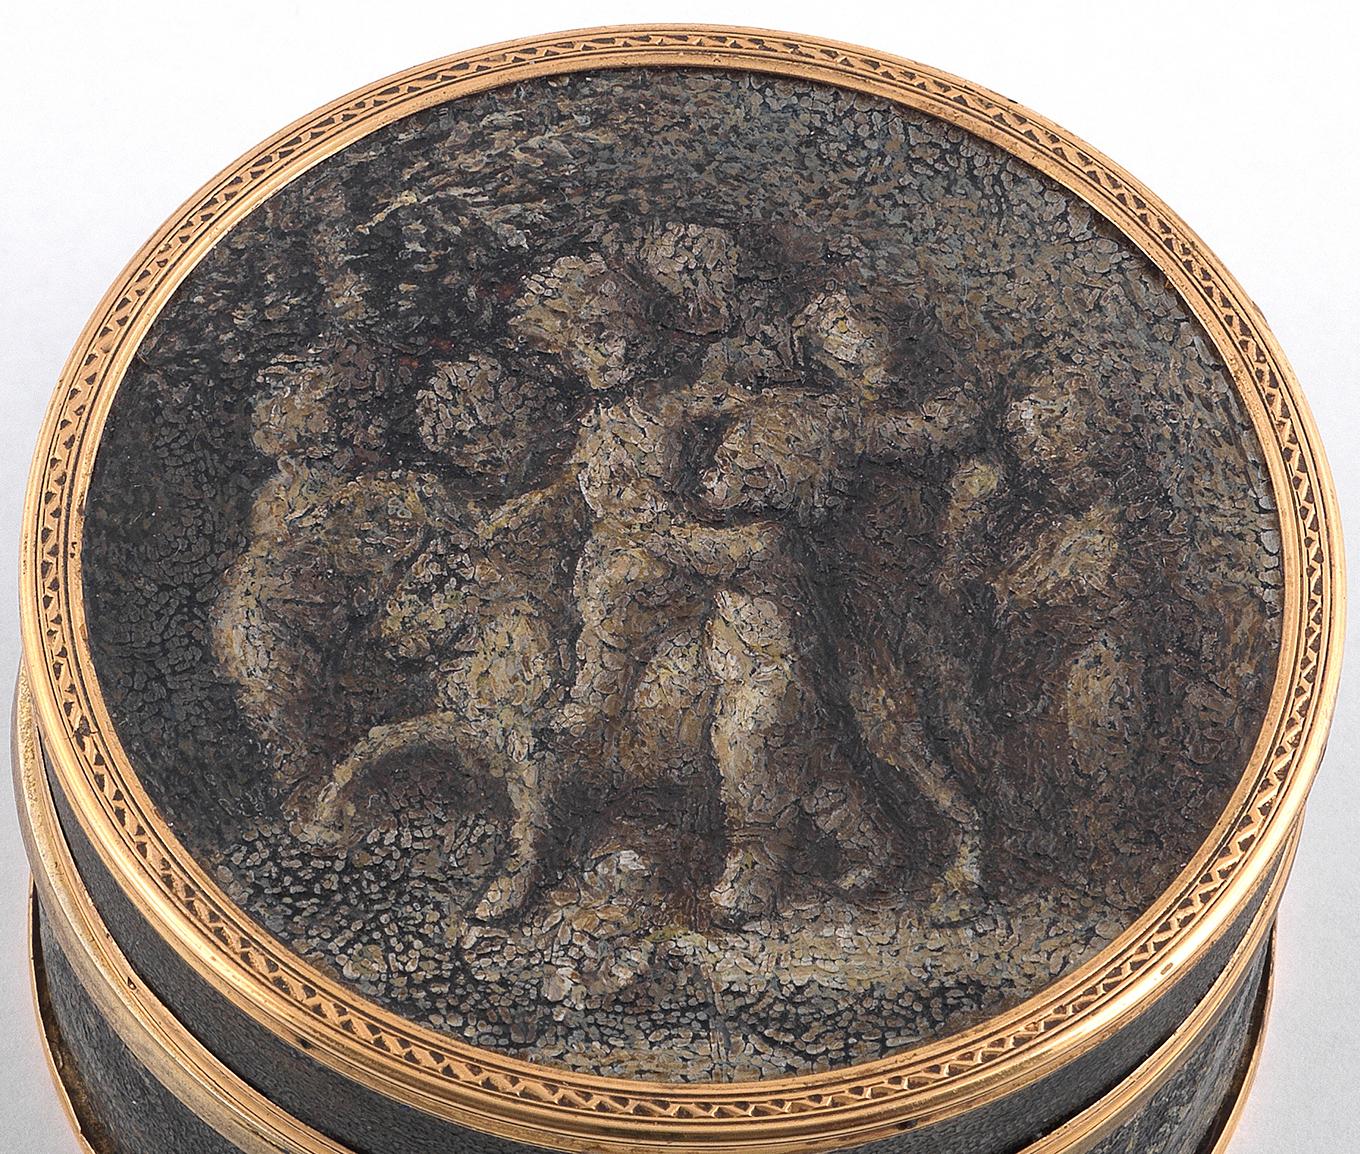 BERNARDO ANTICHITÀ PONTE VECCHIO FLORENCE

The cover set with three putti amidst clouds painted en grisaille, set in the lid of a gilt-mounted tortoiseshell box.
Circular, 63mm dia.